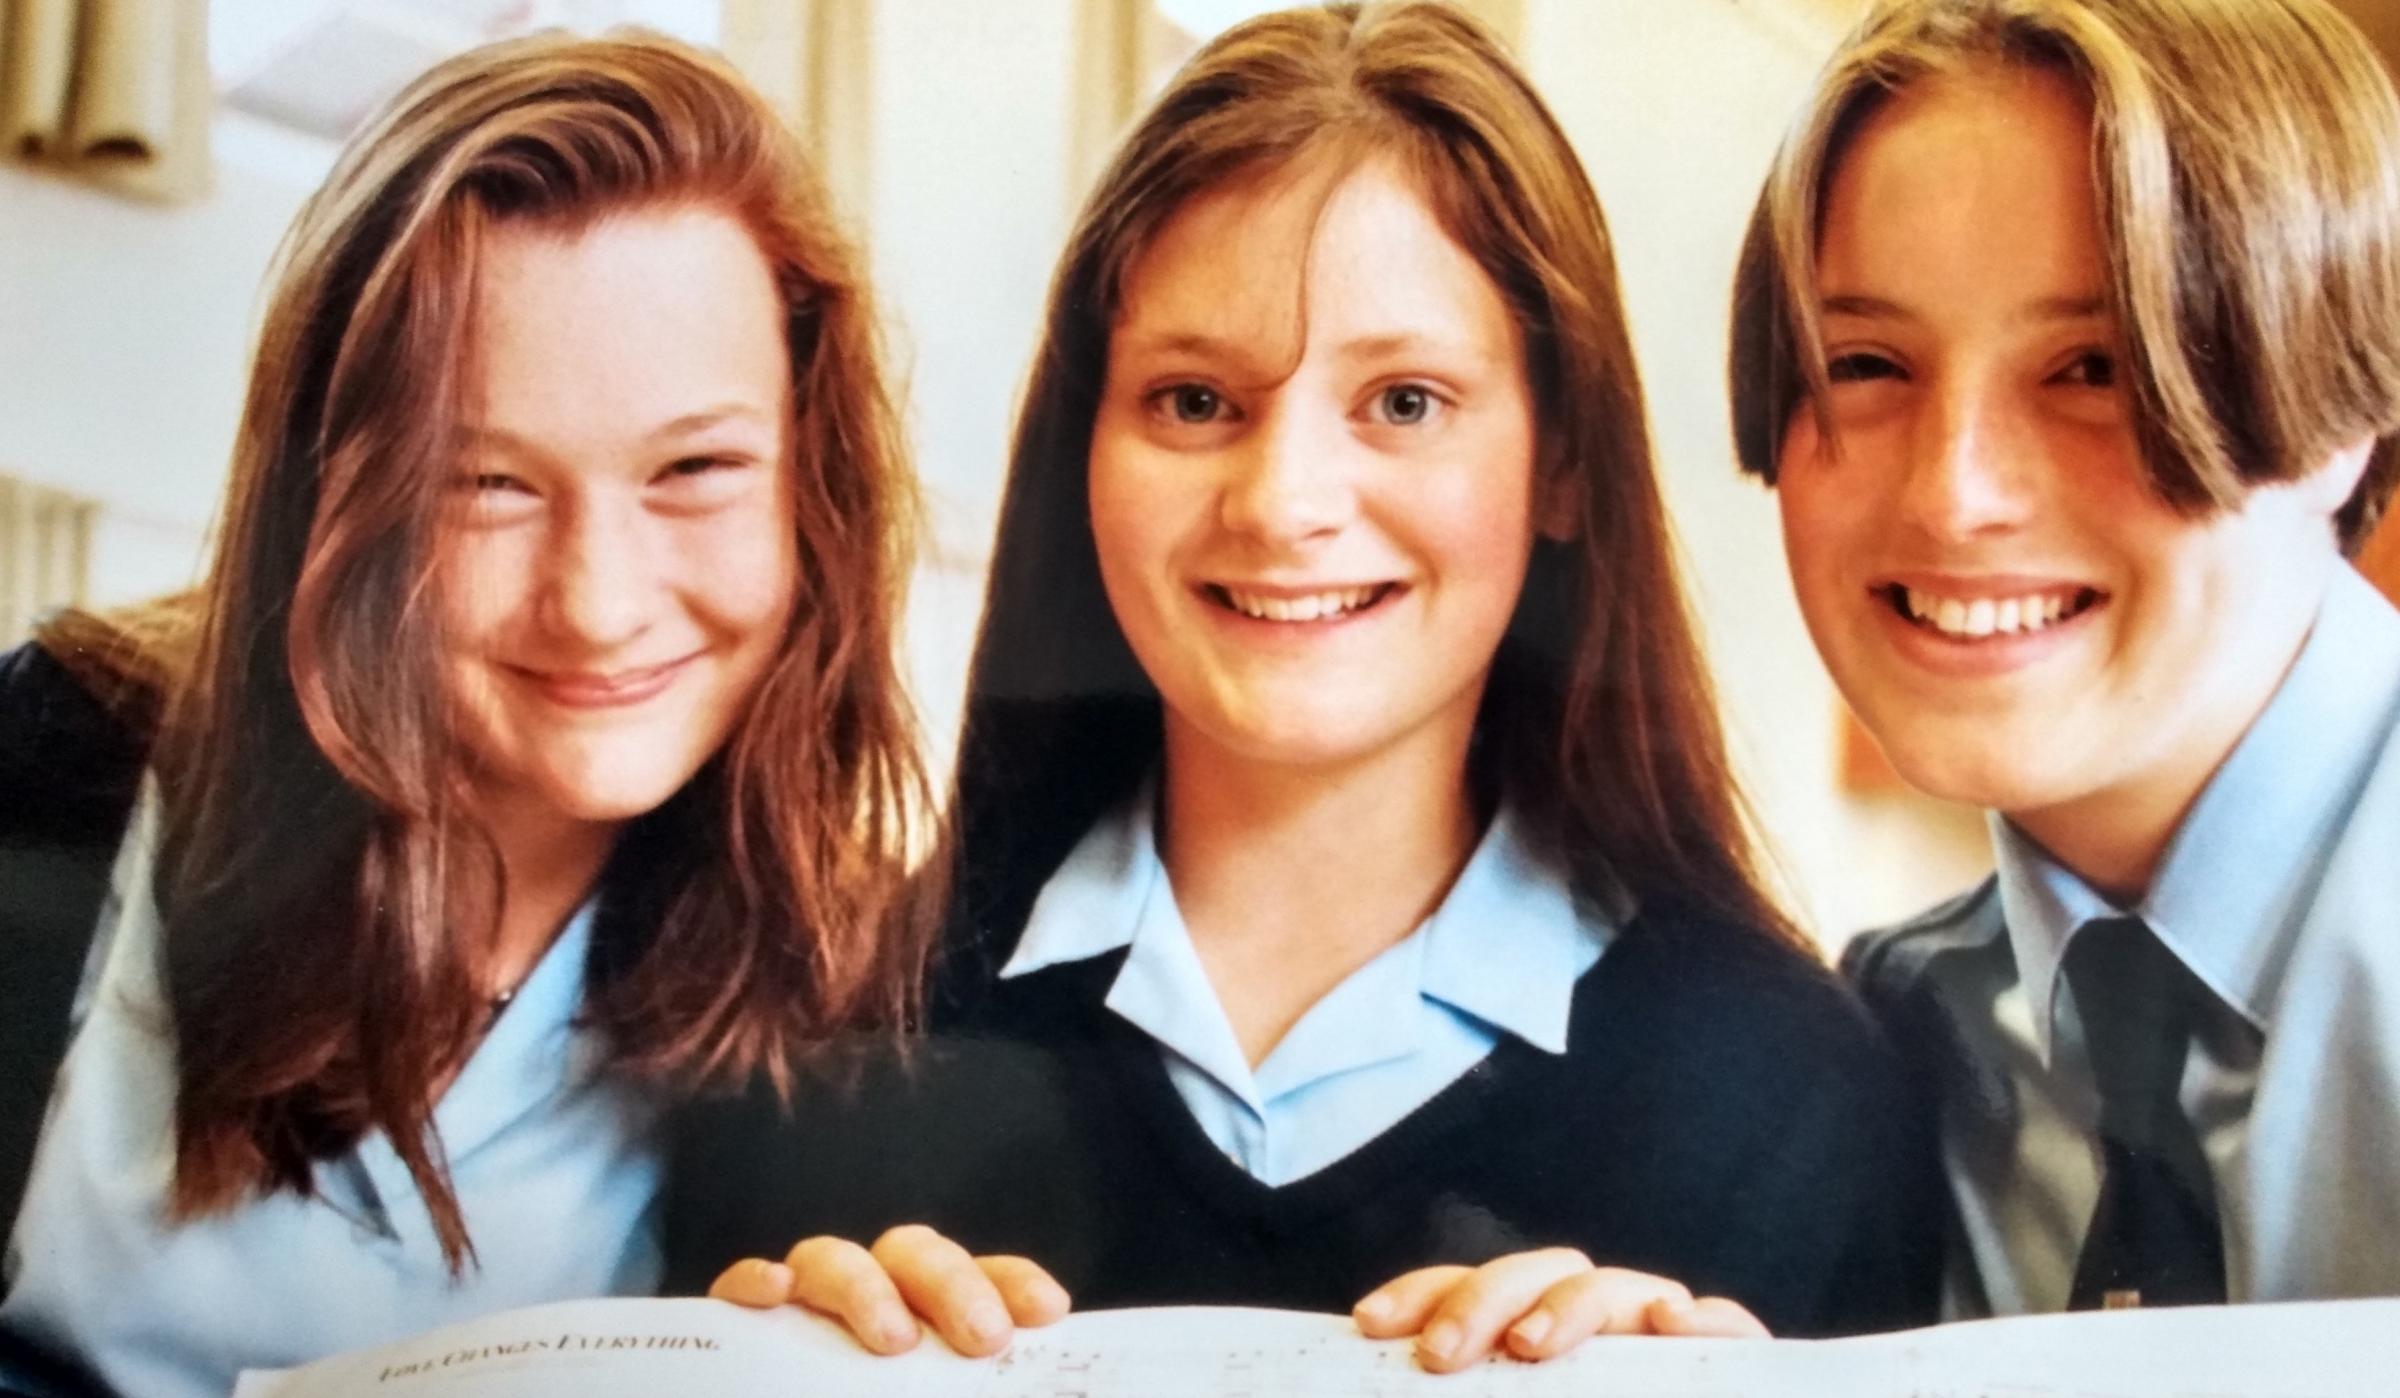 July 1994 and pictured are the winners of the schools annual Musician of the Year contest. From left, Sharon Smith (top junior musician), Ellie Doodey (top singer) and Helen Jones (top senior musician)